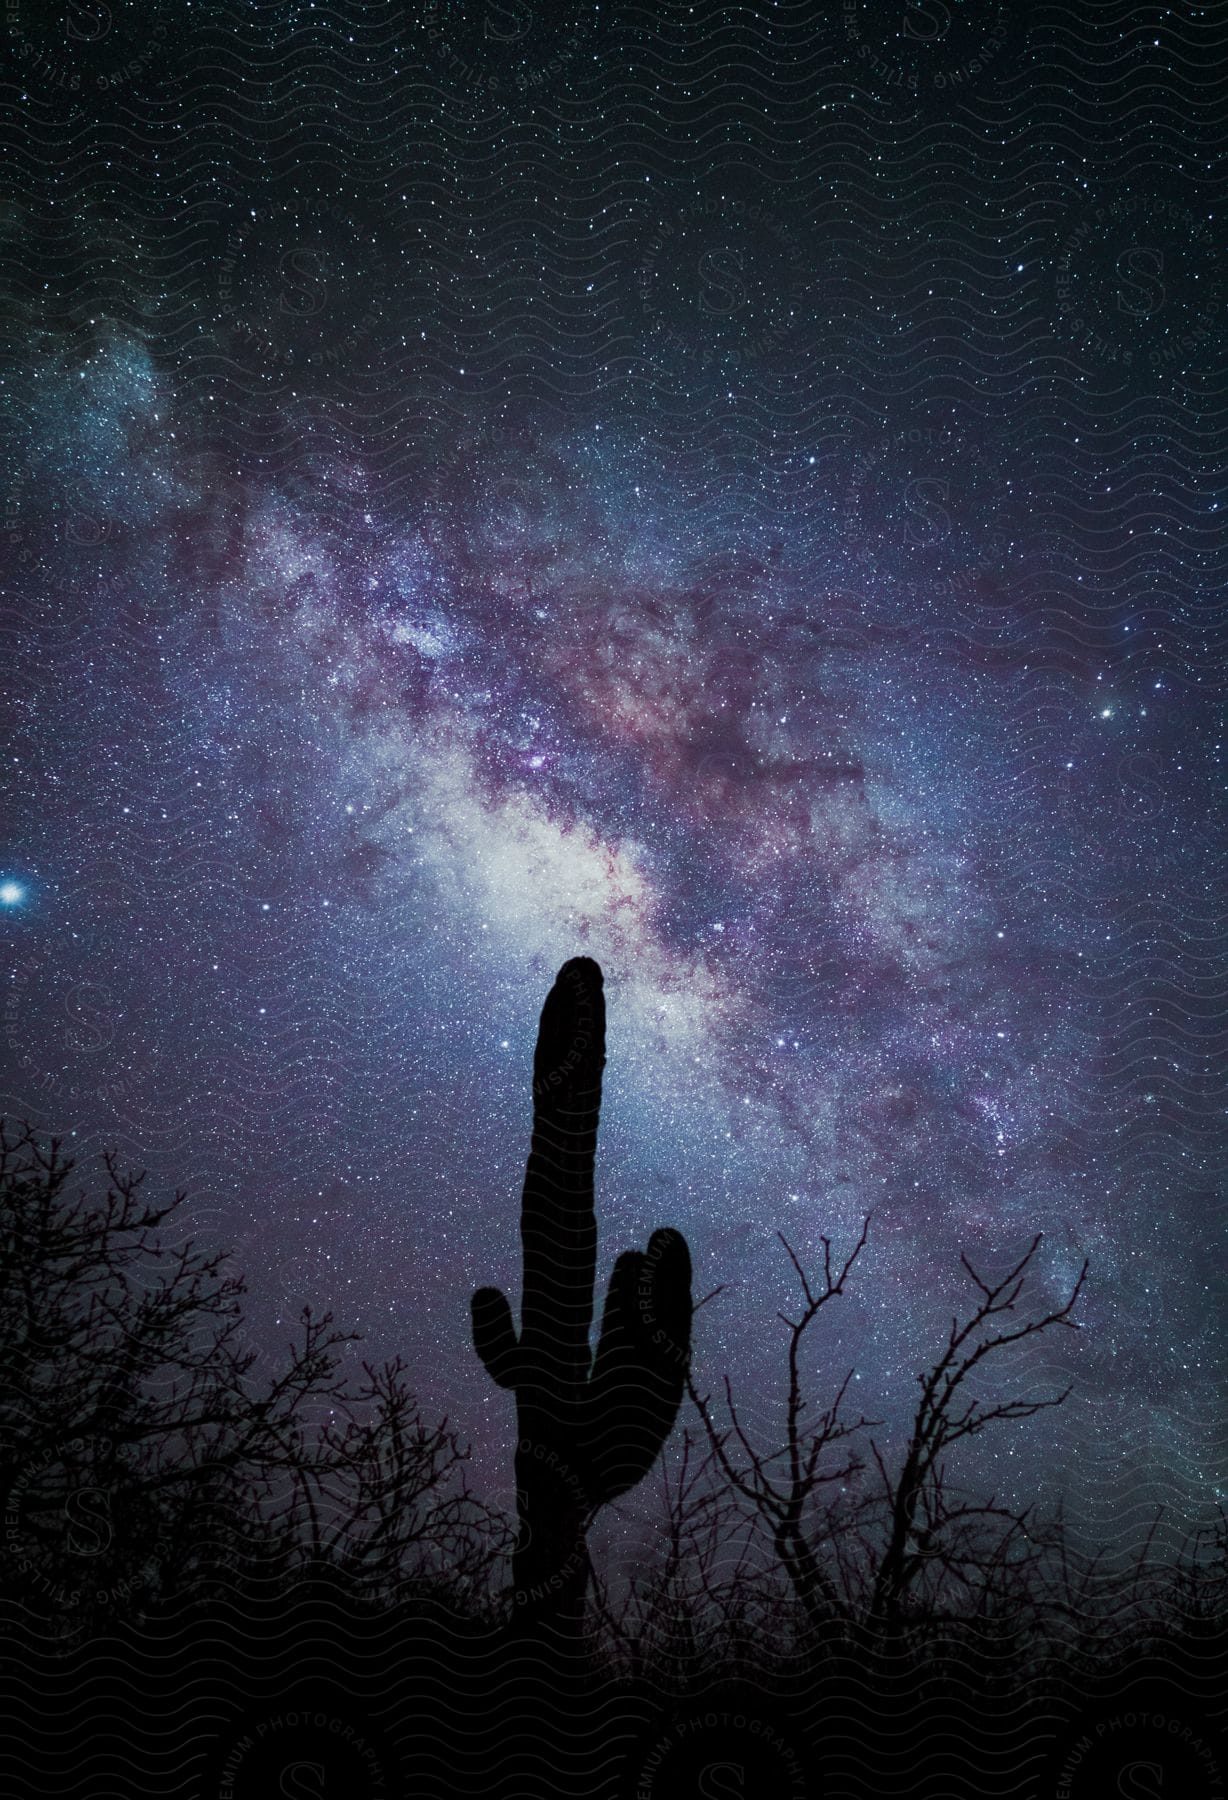 A cactus silhouetted against a starry sky illuminated by the Milky Way.